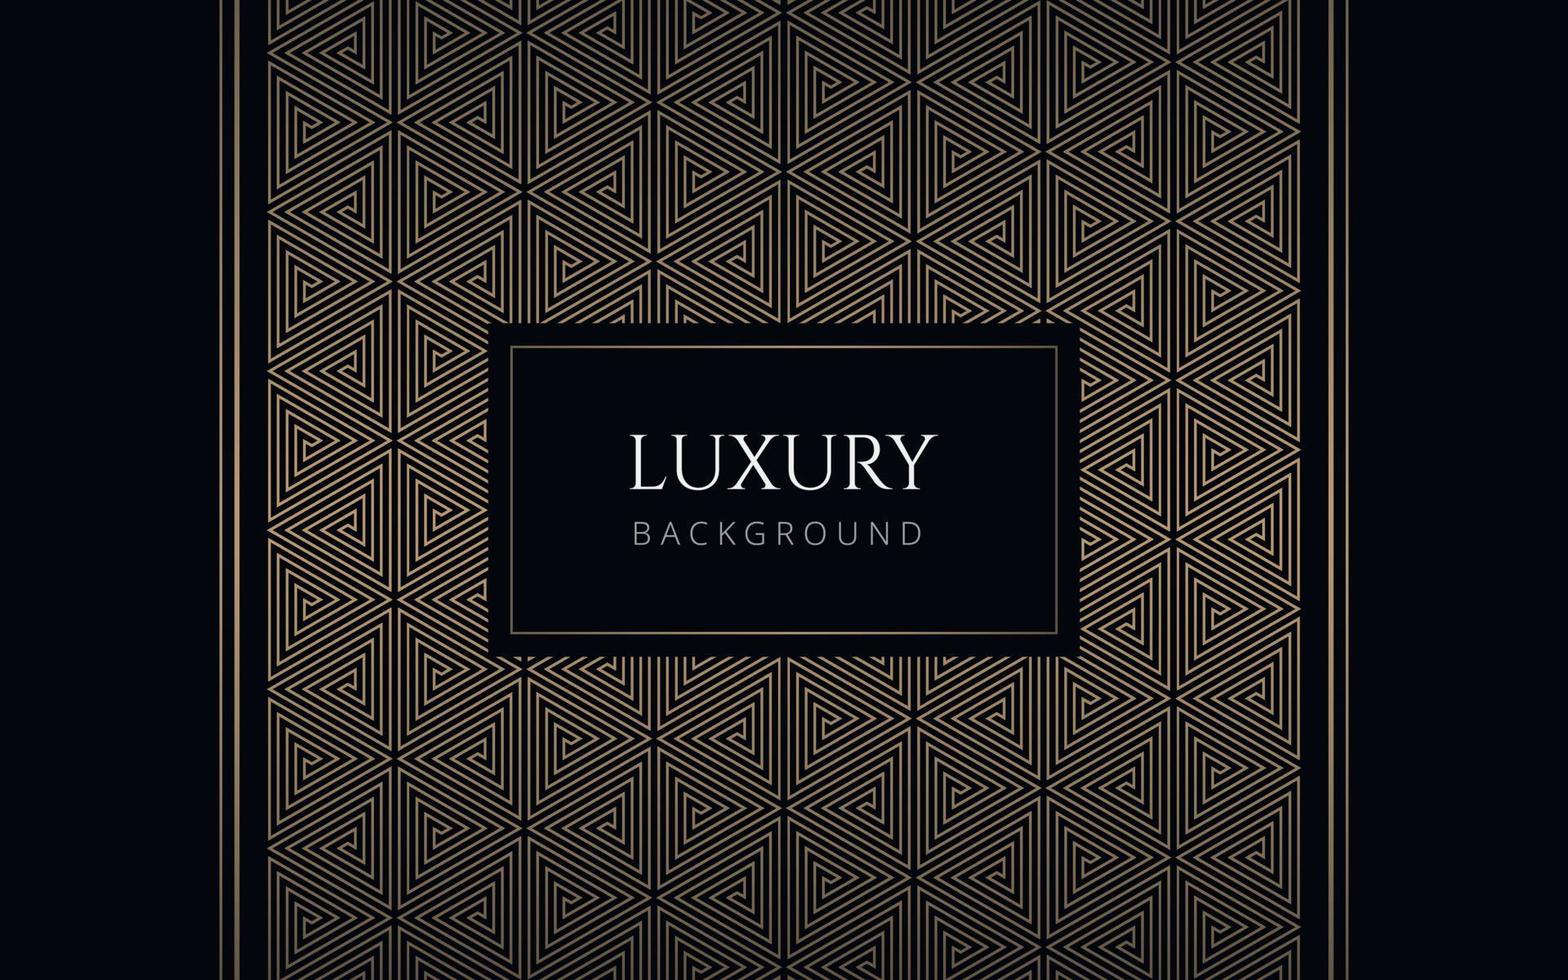 Luxury abstract black and gold triangle pattern. Formal premium background template useful for invitation design, gift card, voucher, gift coupon, VIP invitation. Elegant geometric triangular backdrop vector